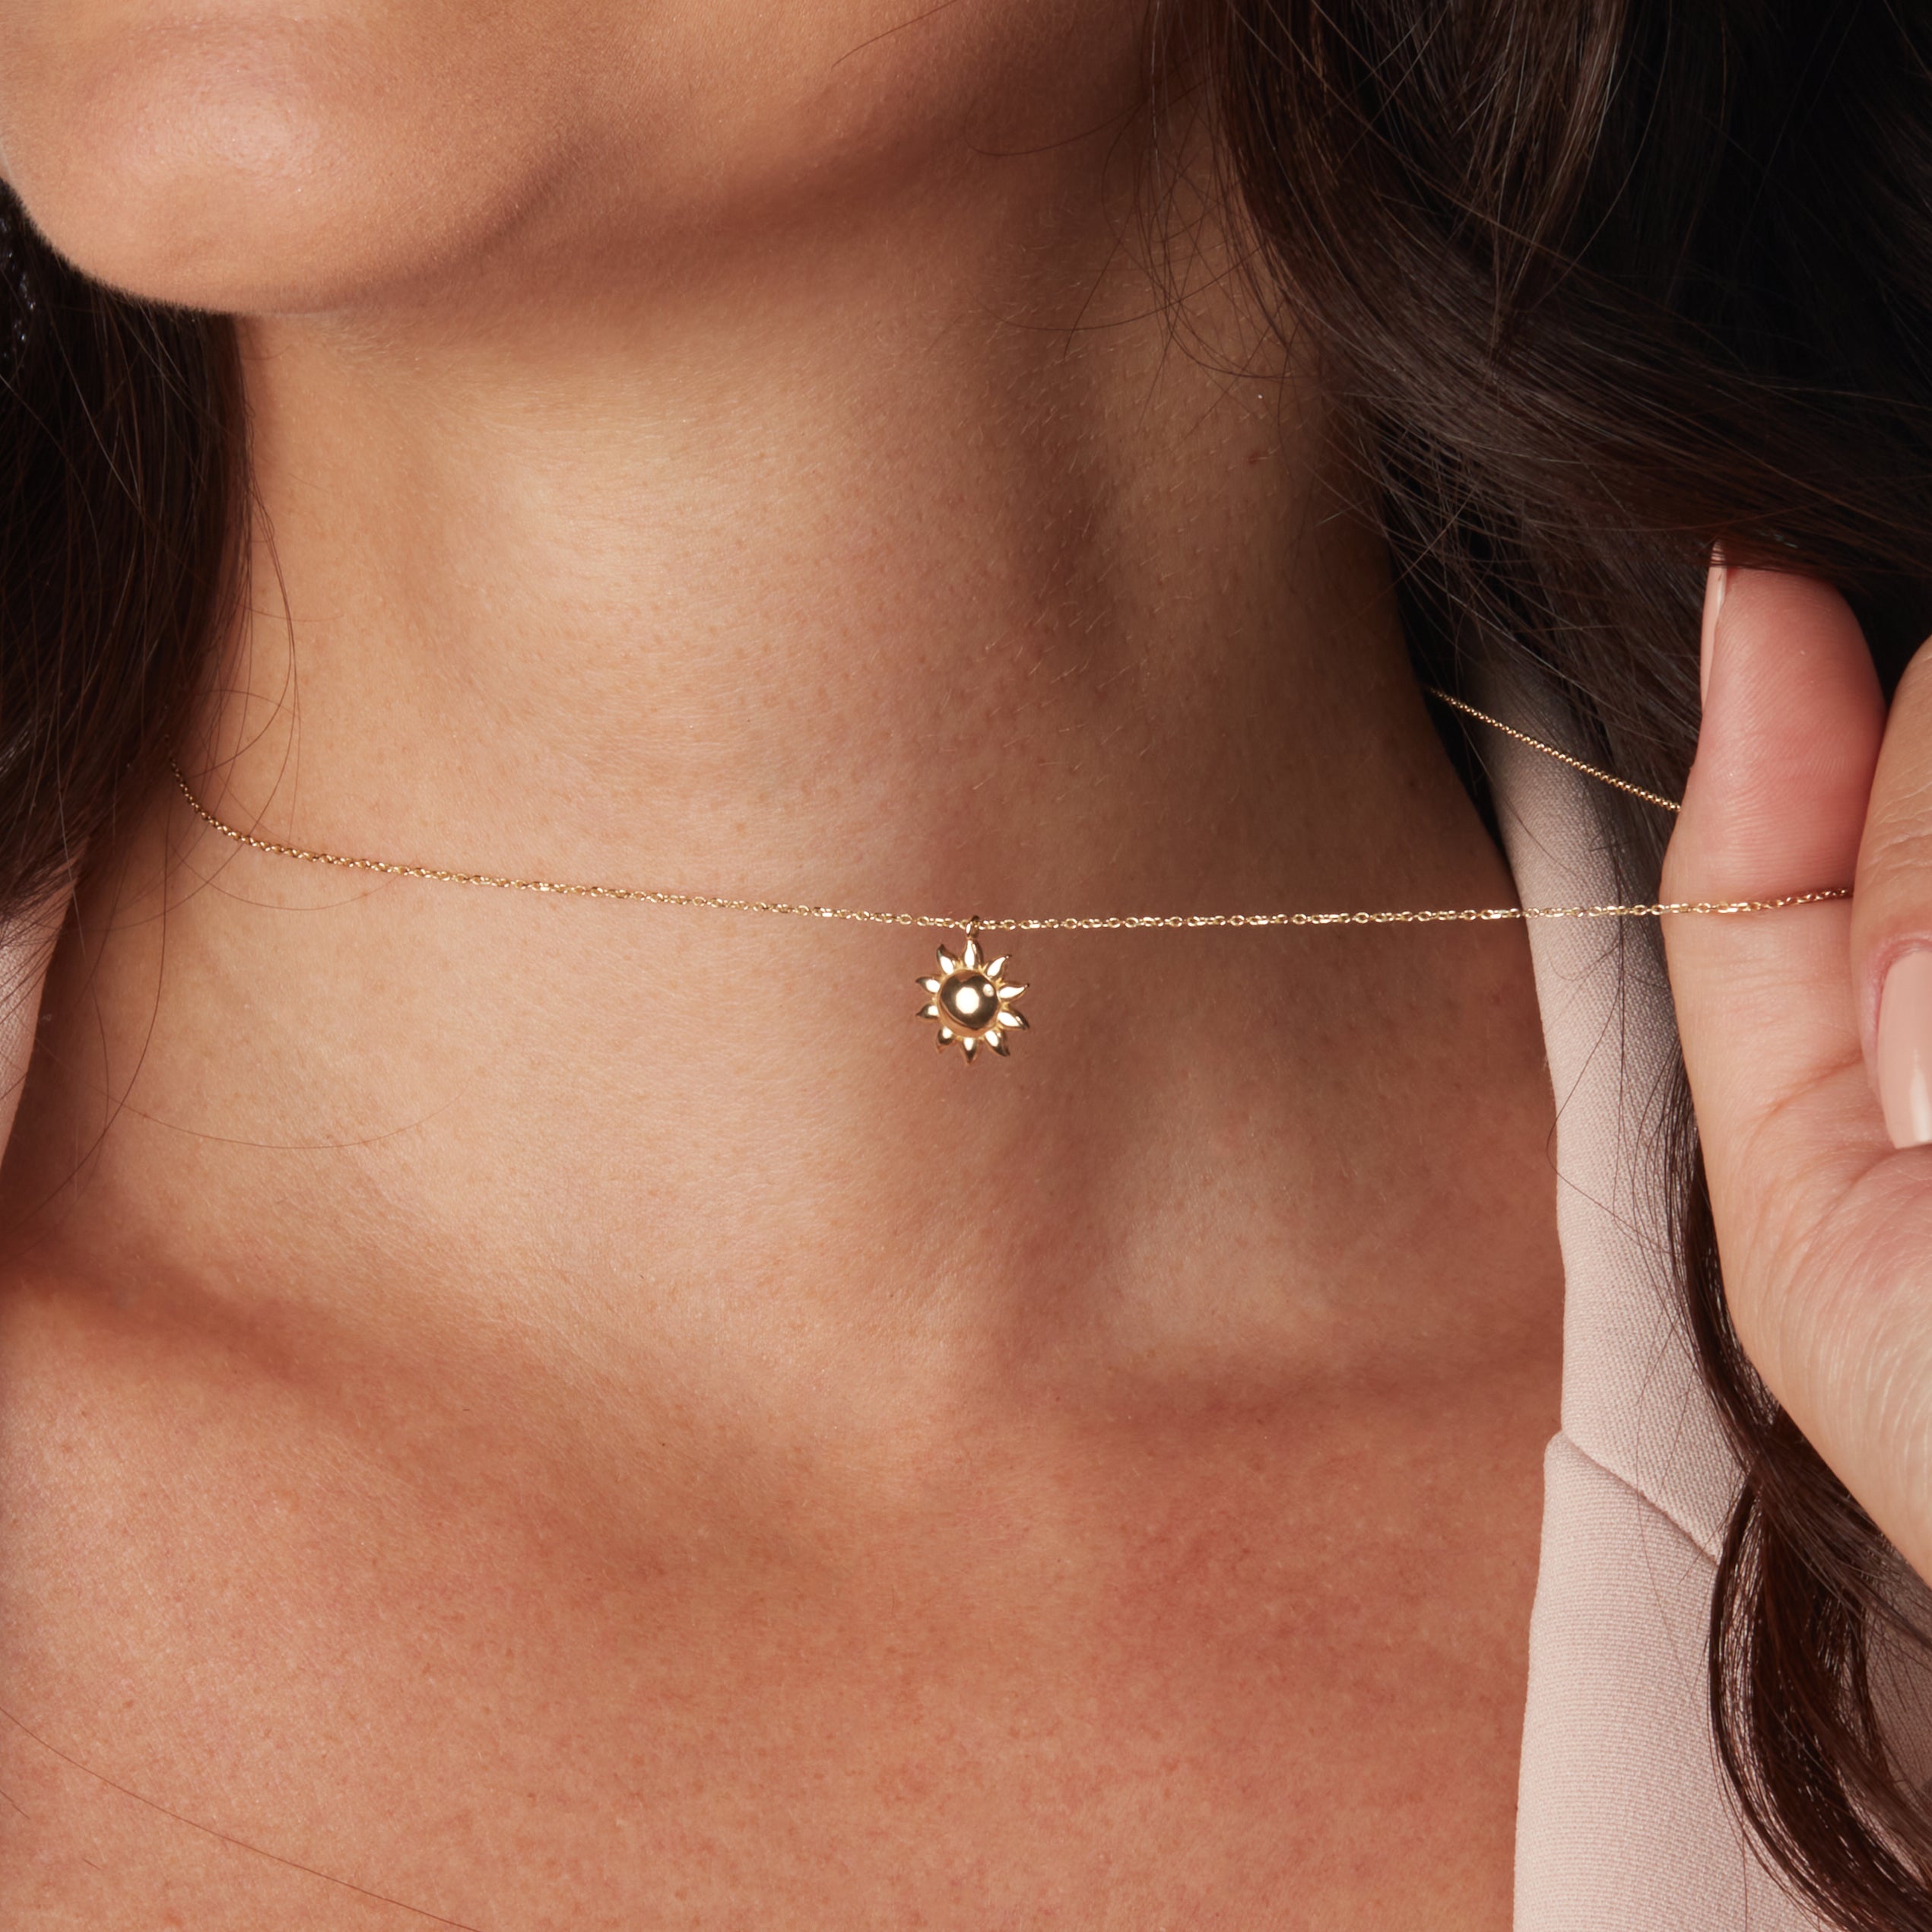 FarF ME 18K Gold Plated Sun Sun And Moon Necklace With Stackable Chain  Minimalist Style For Women And Girls No. L230824 From Ch_an_el_, $16.25 |  DHgate.Com